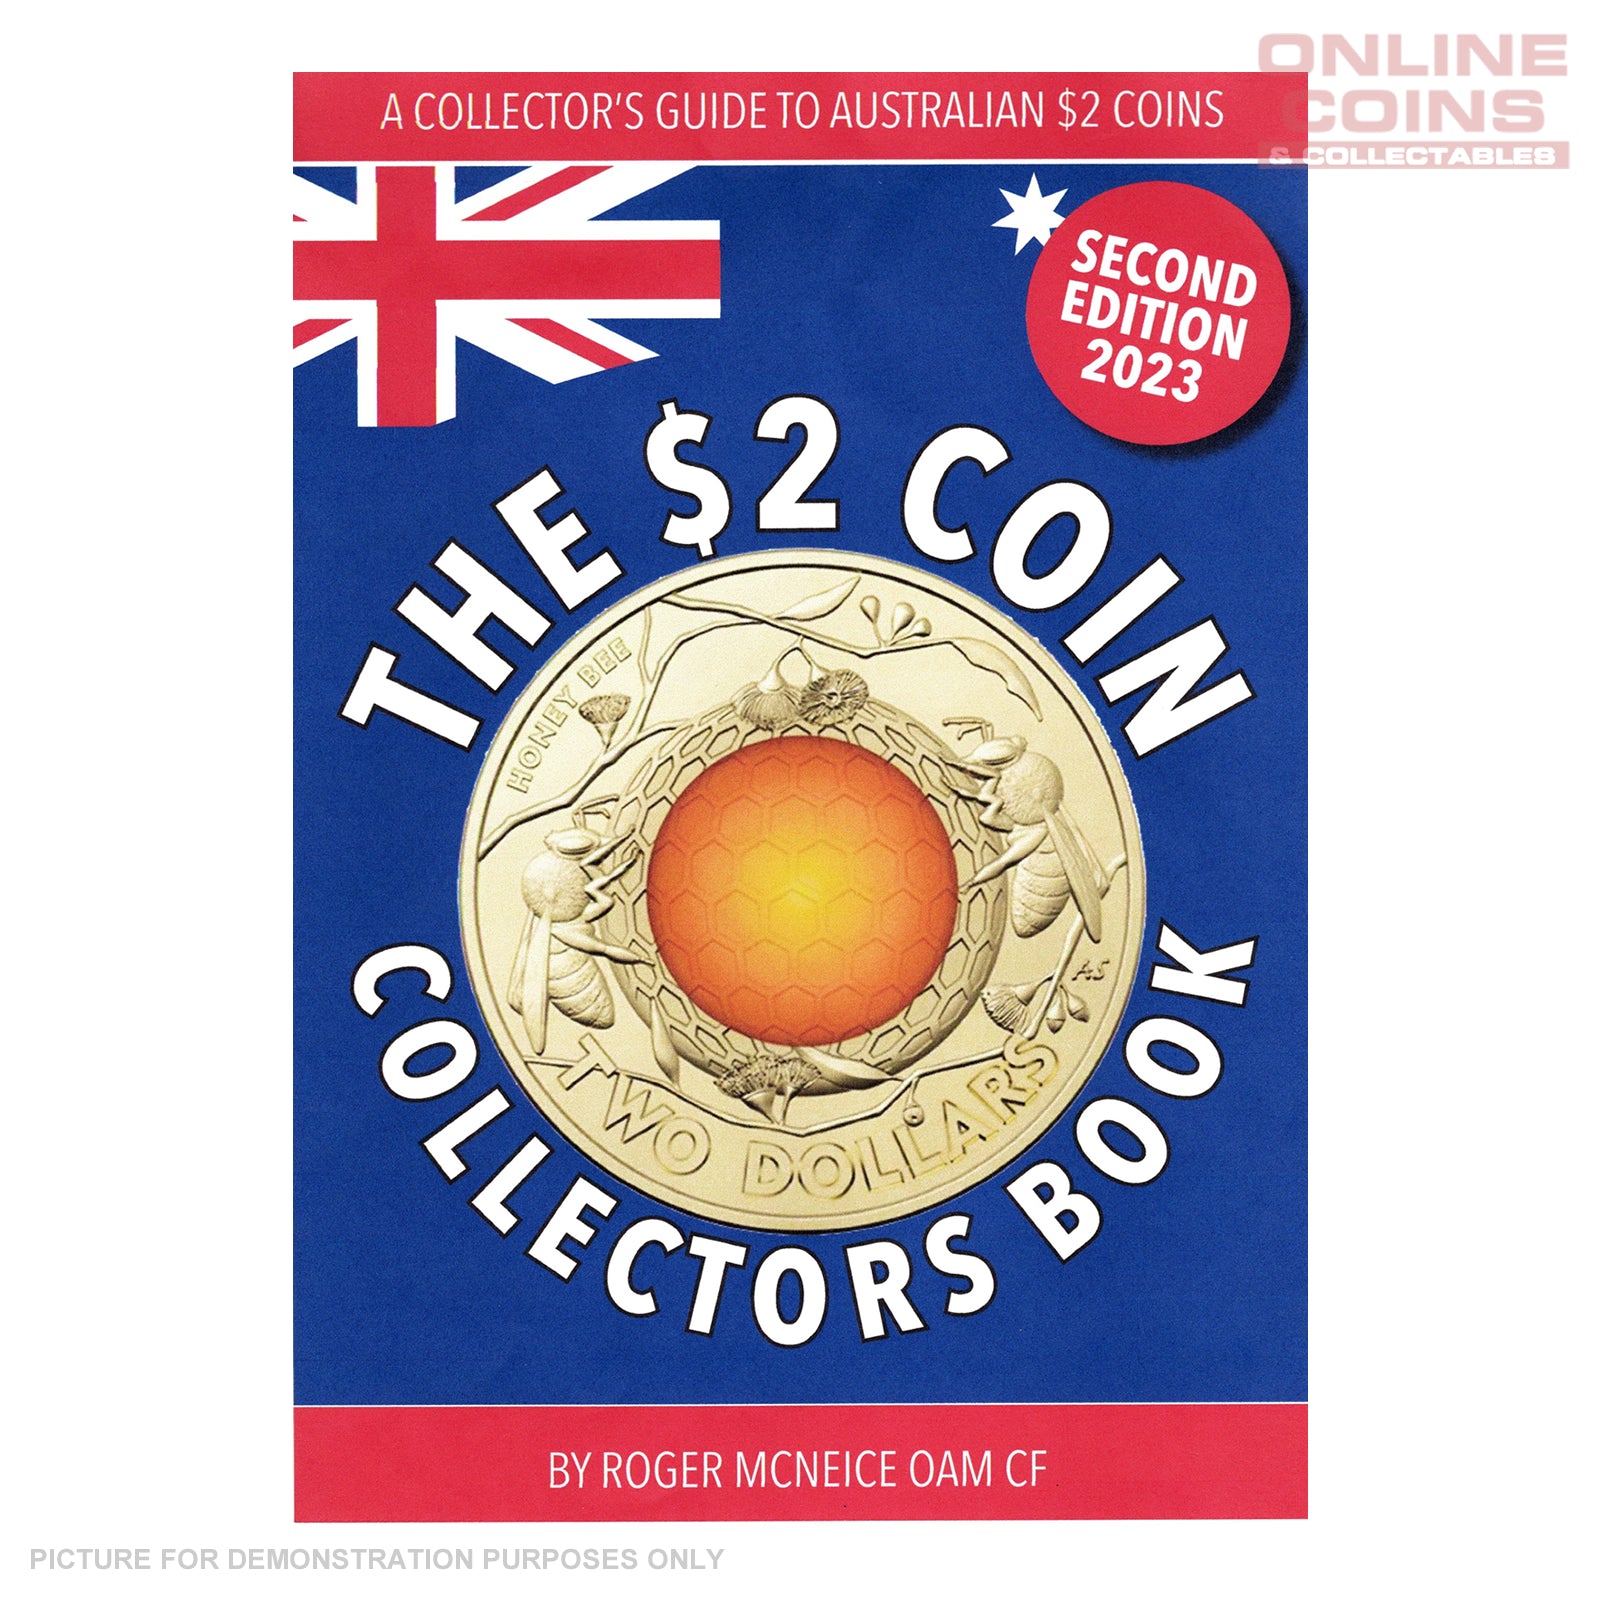 The $2 Coin Collectors Book - Second Edition by Roger McNeice - IN STORE NOW